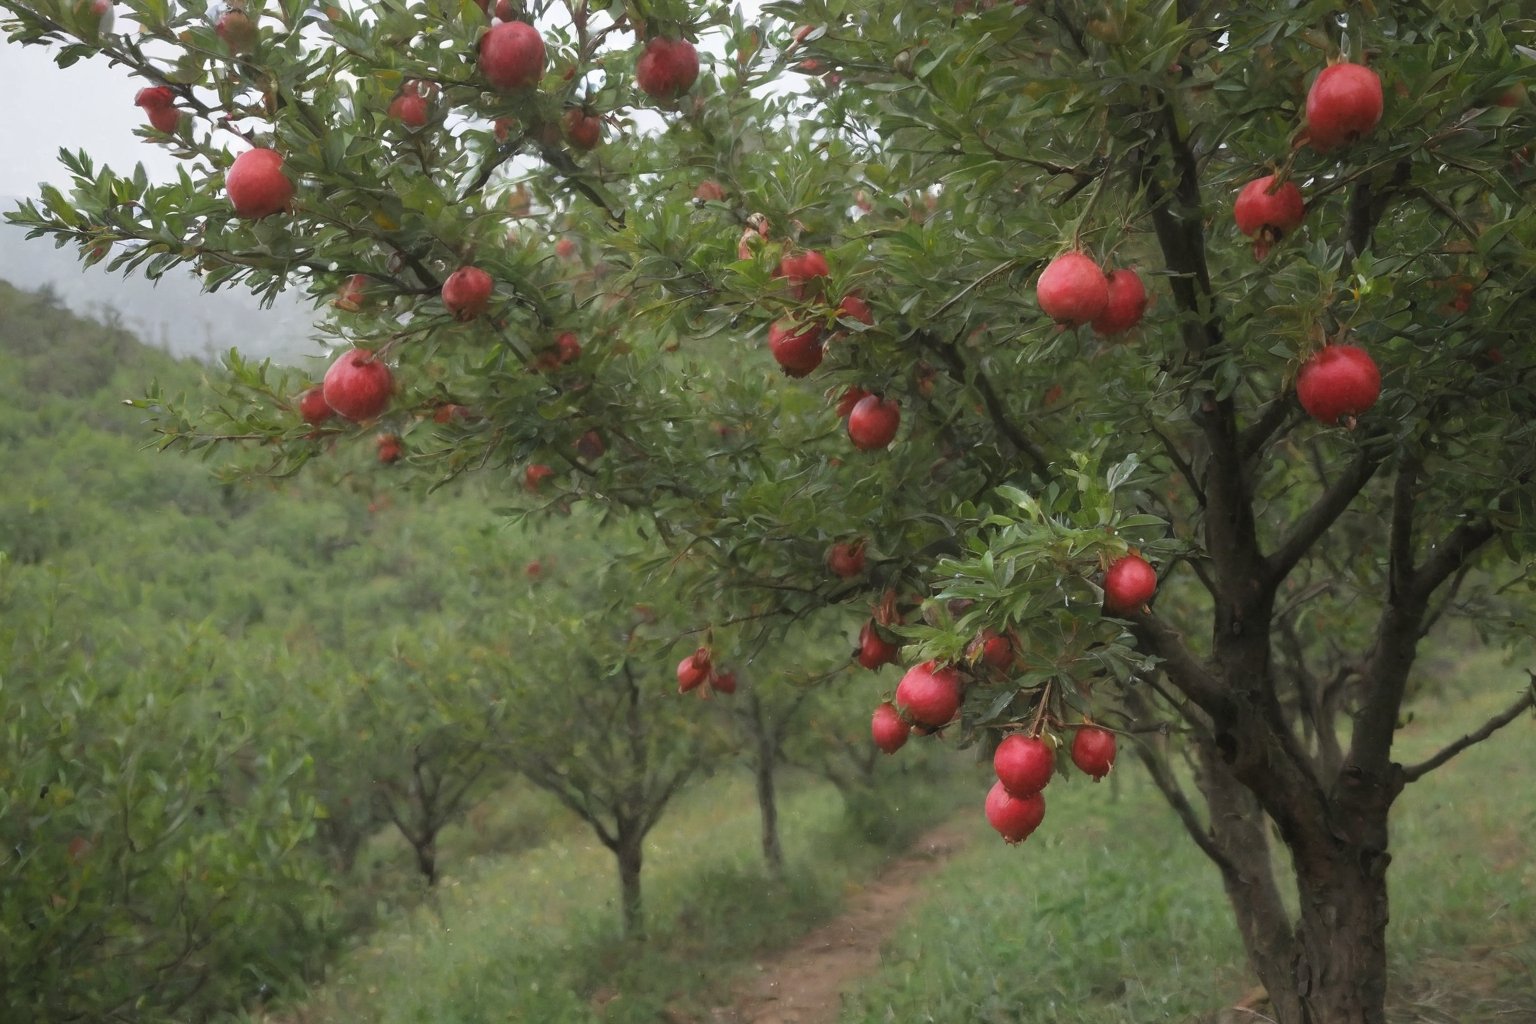 Slight drizzle, the mountains are filled with pomegranate trees, they have bloomed